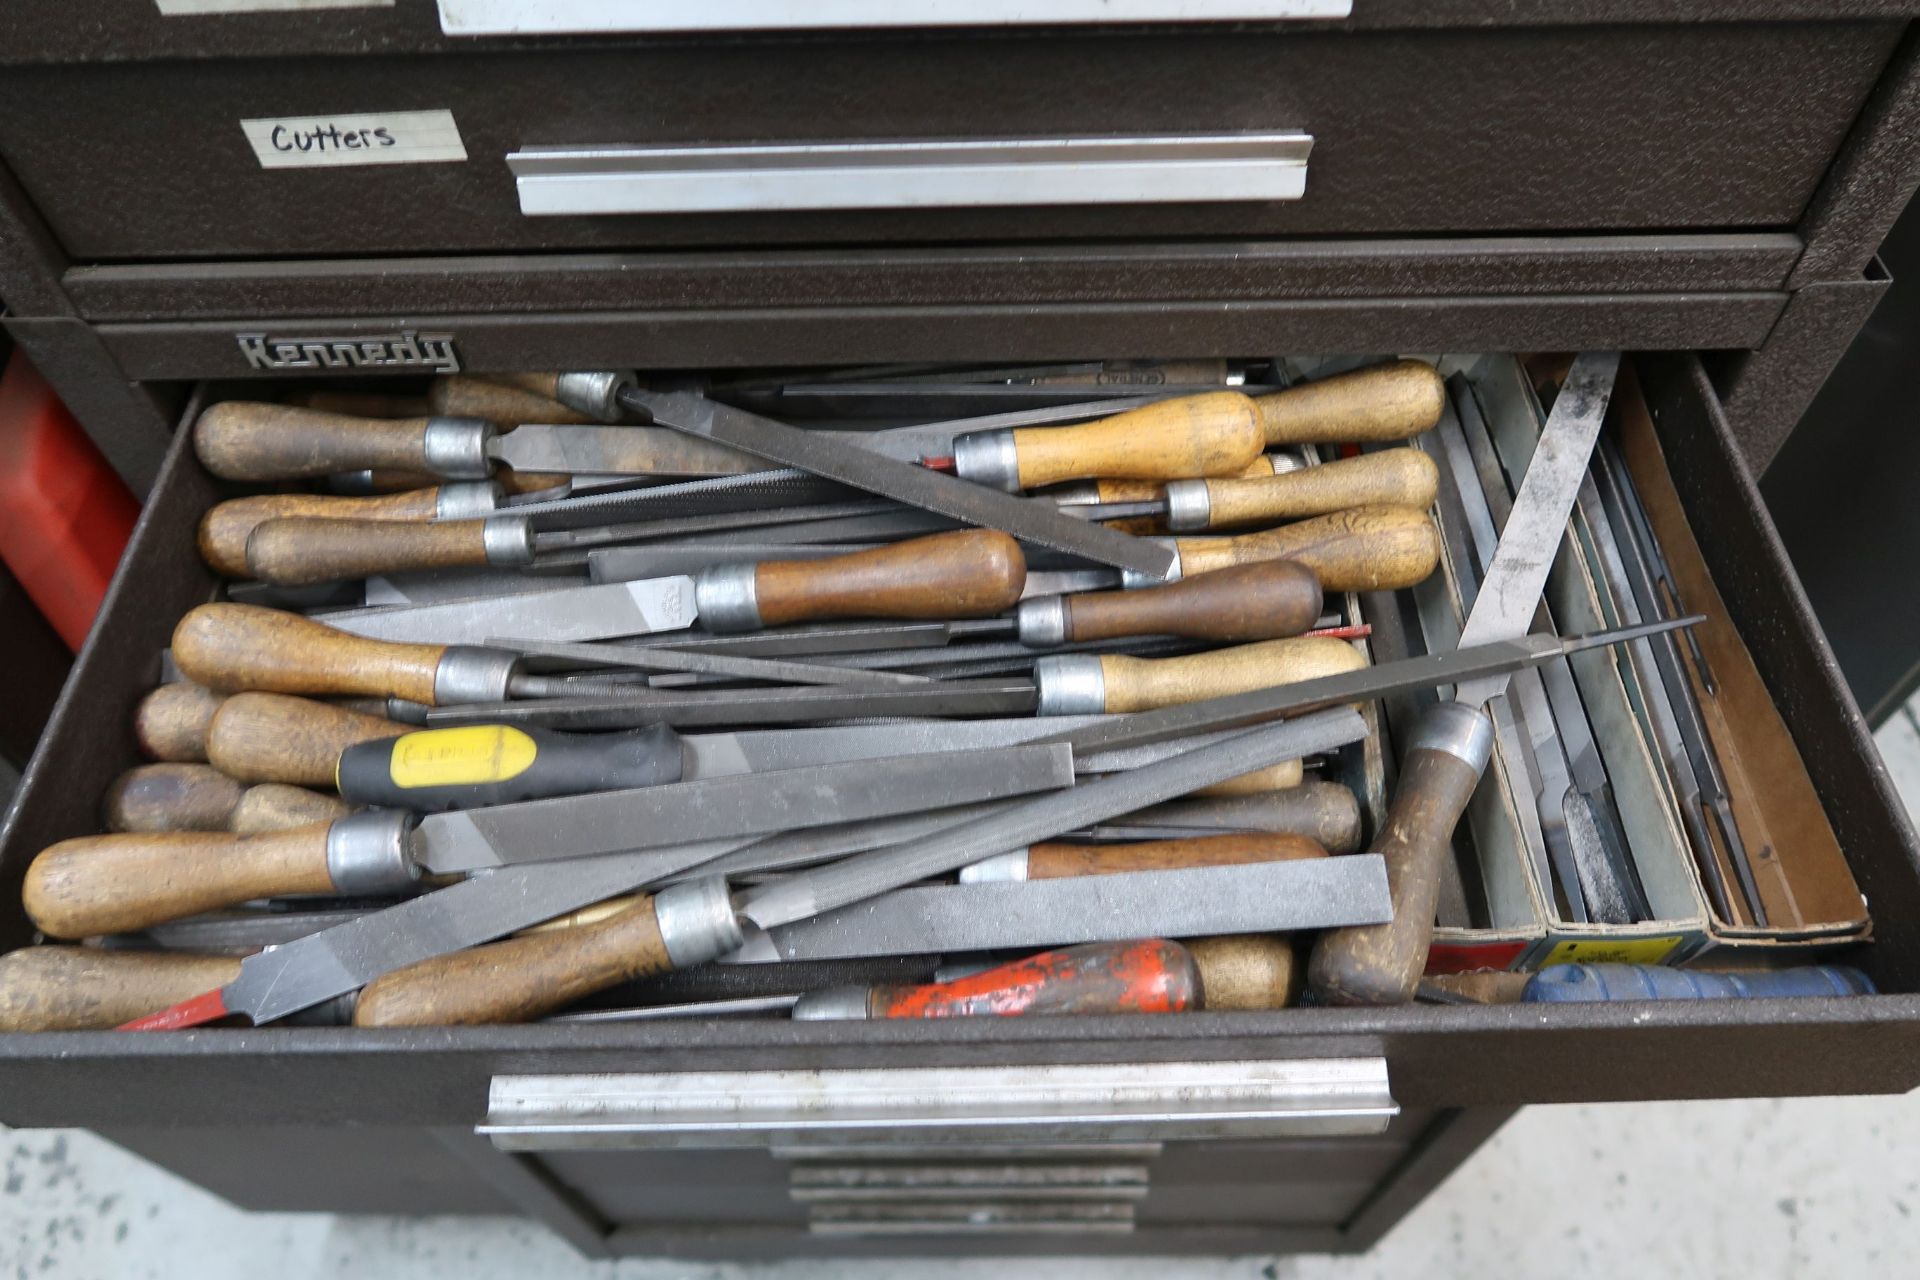 15-DRAWER KENNEDY PORTABLE TOOLBOX WITH TOOLS - Image 8 of 15